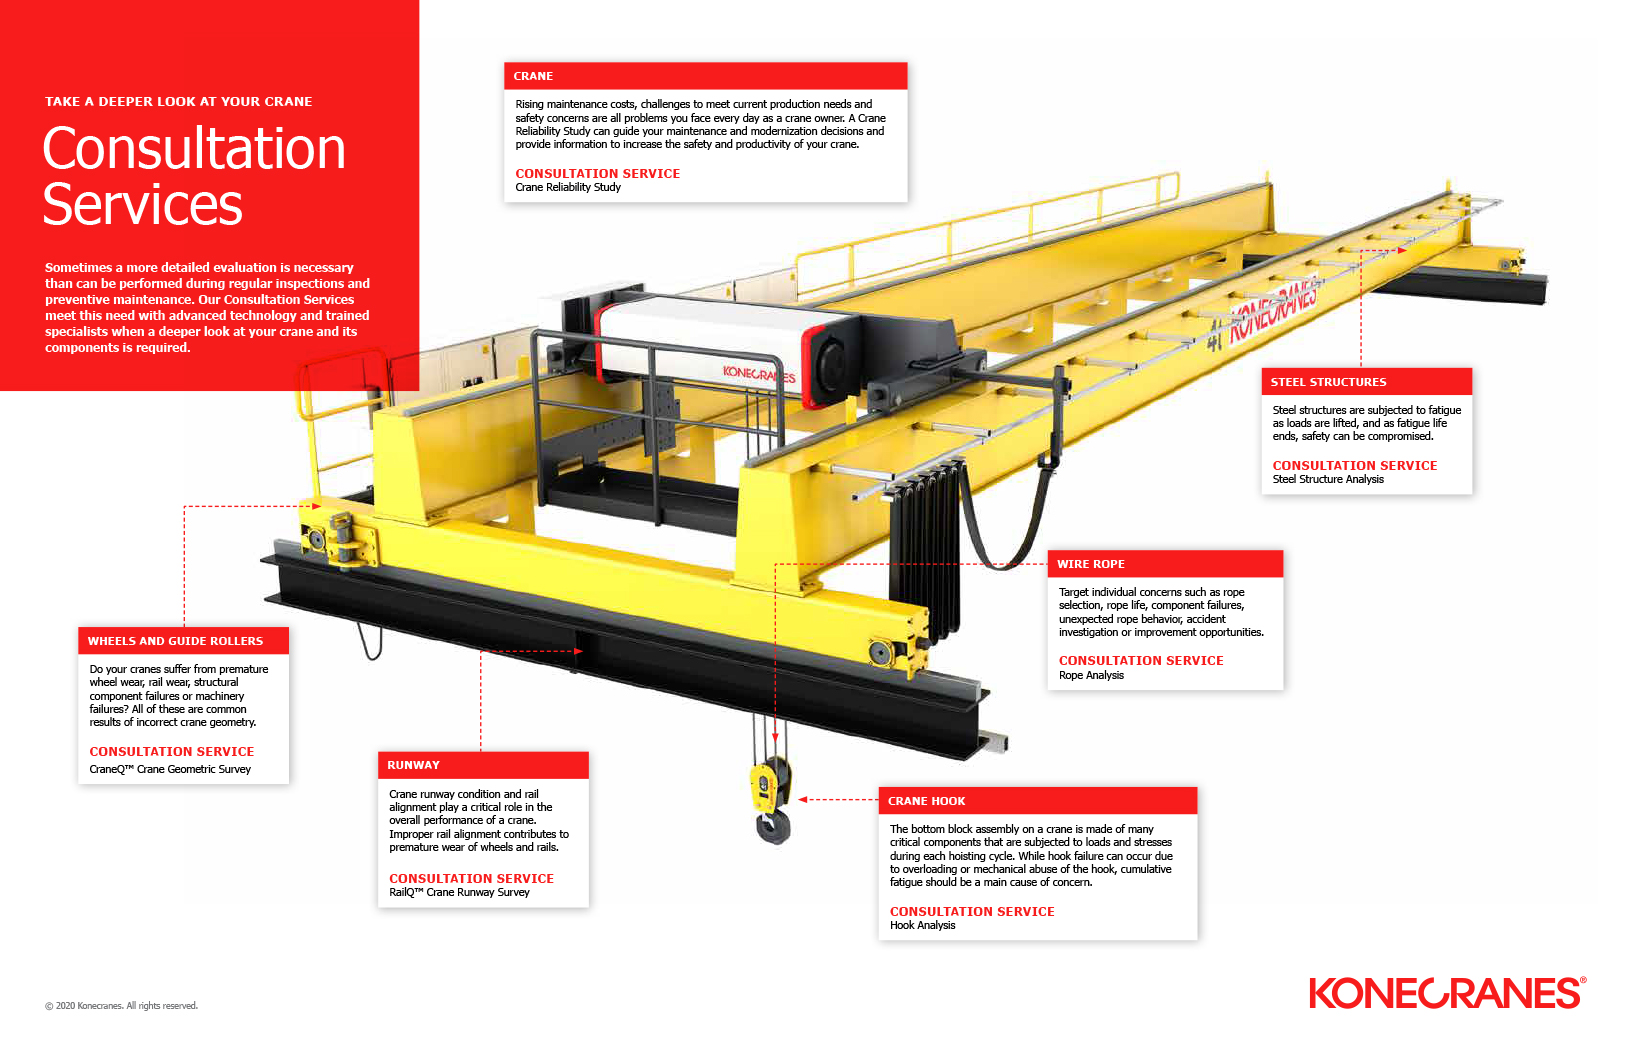 Advanced services for overhead cranes